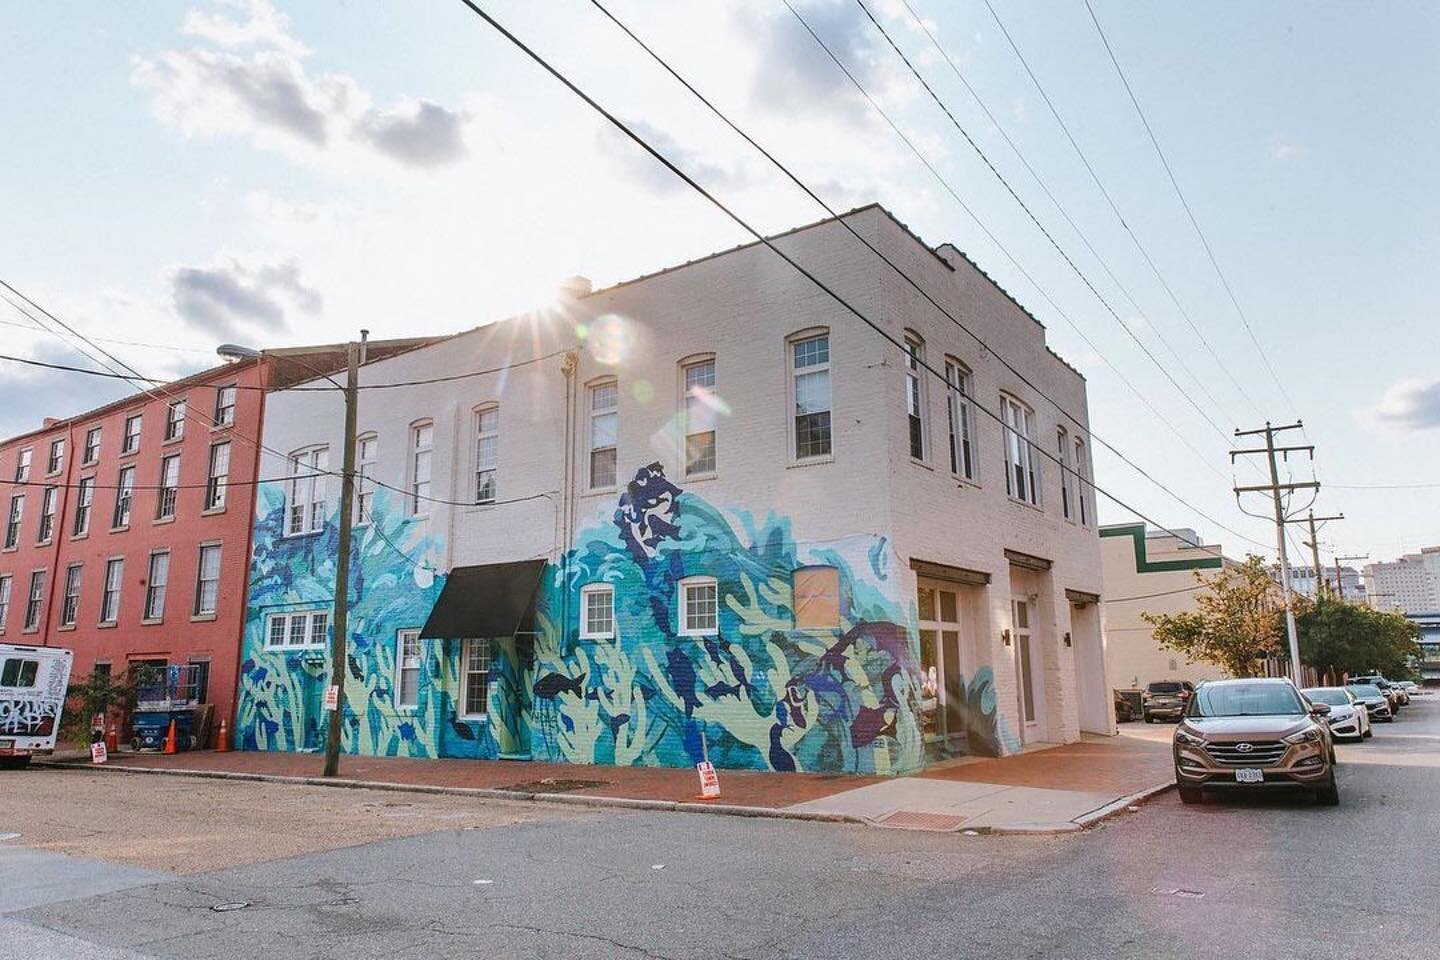 It's Black Pride RVA Weekend 2021, which feels like a great time for a self-guided tour of the beautiful Mending Walls RVA murals all around Richmond 🎨🏙️ 
⠀⠀⠀⠀⠀⠀⠀⠀⠀
You can get started at the following addresses, listed in the same order of the art